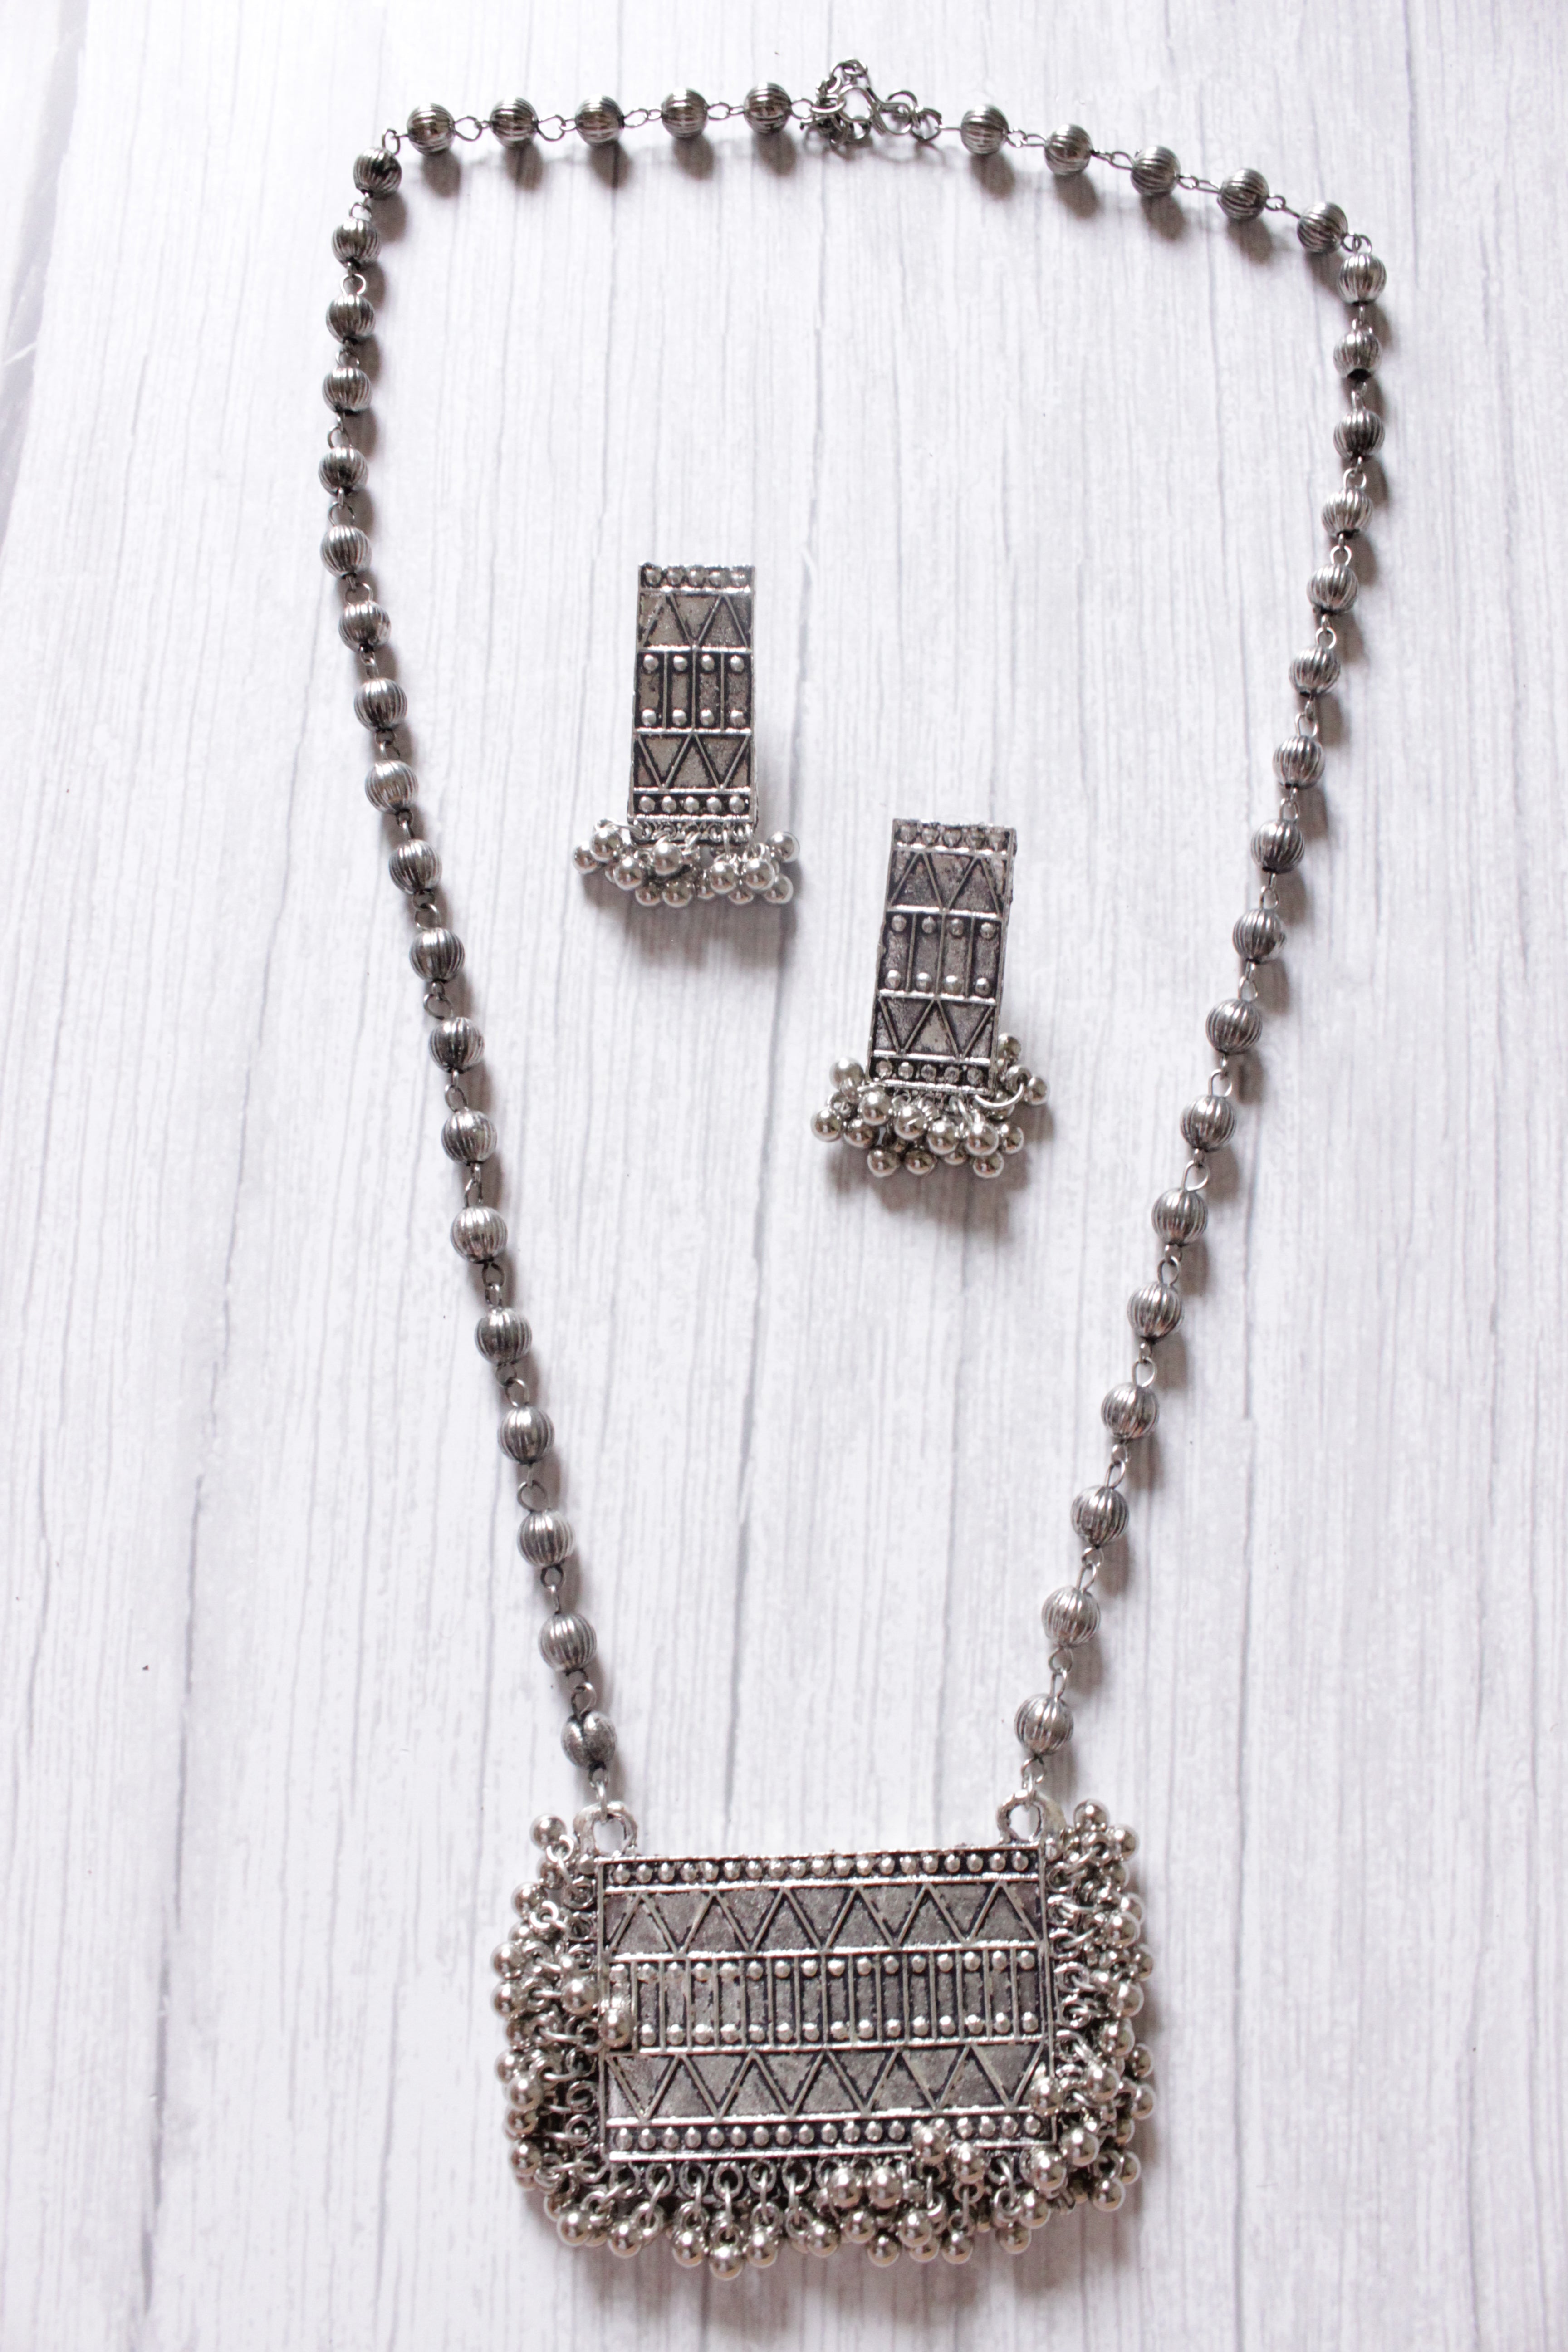 Metal Beads Chain Long Necklace Set